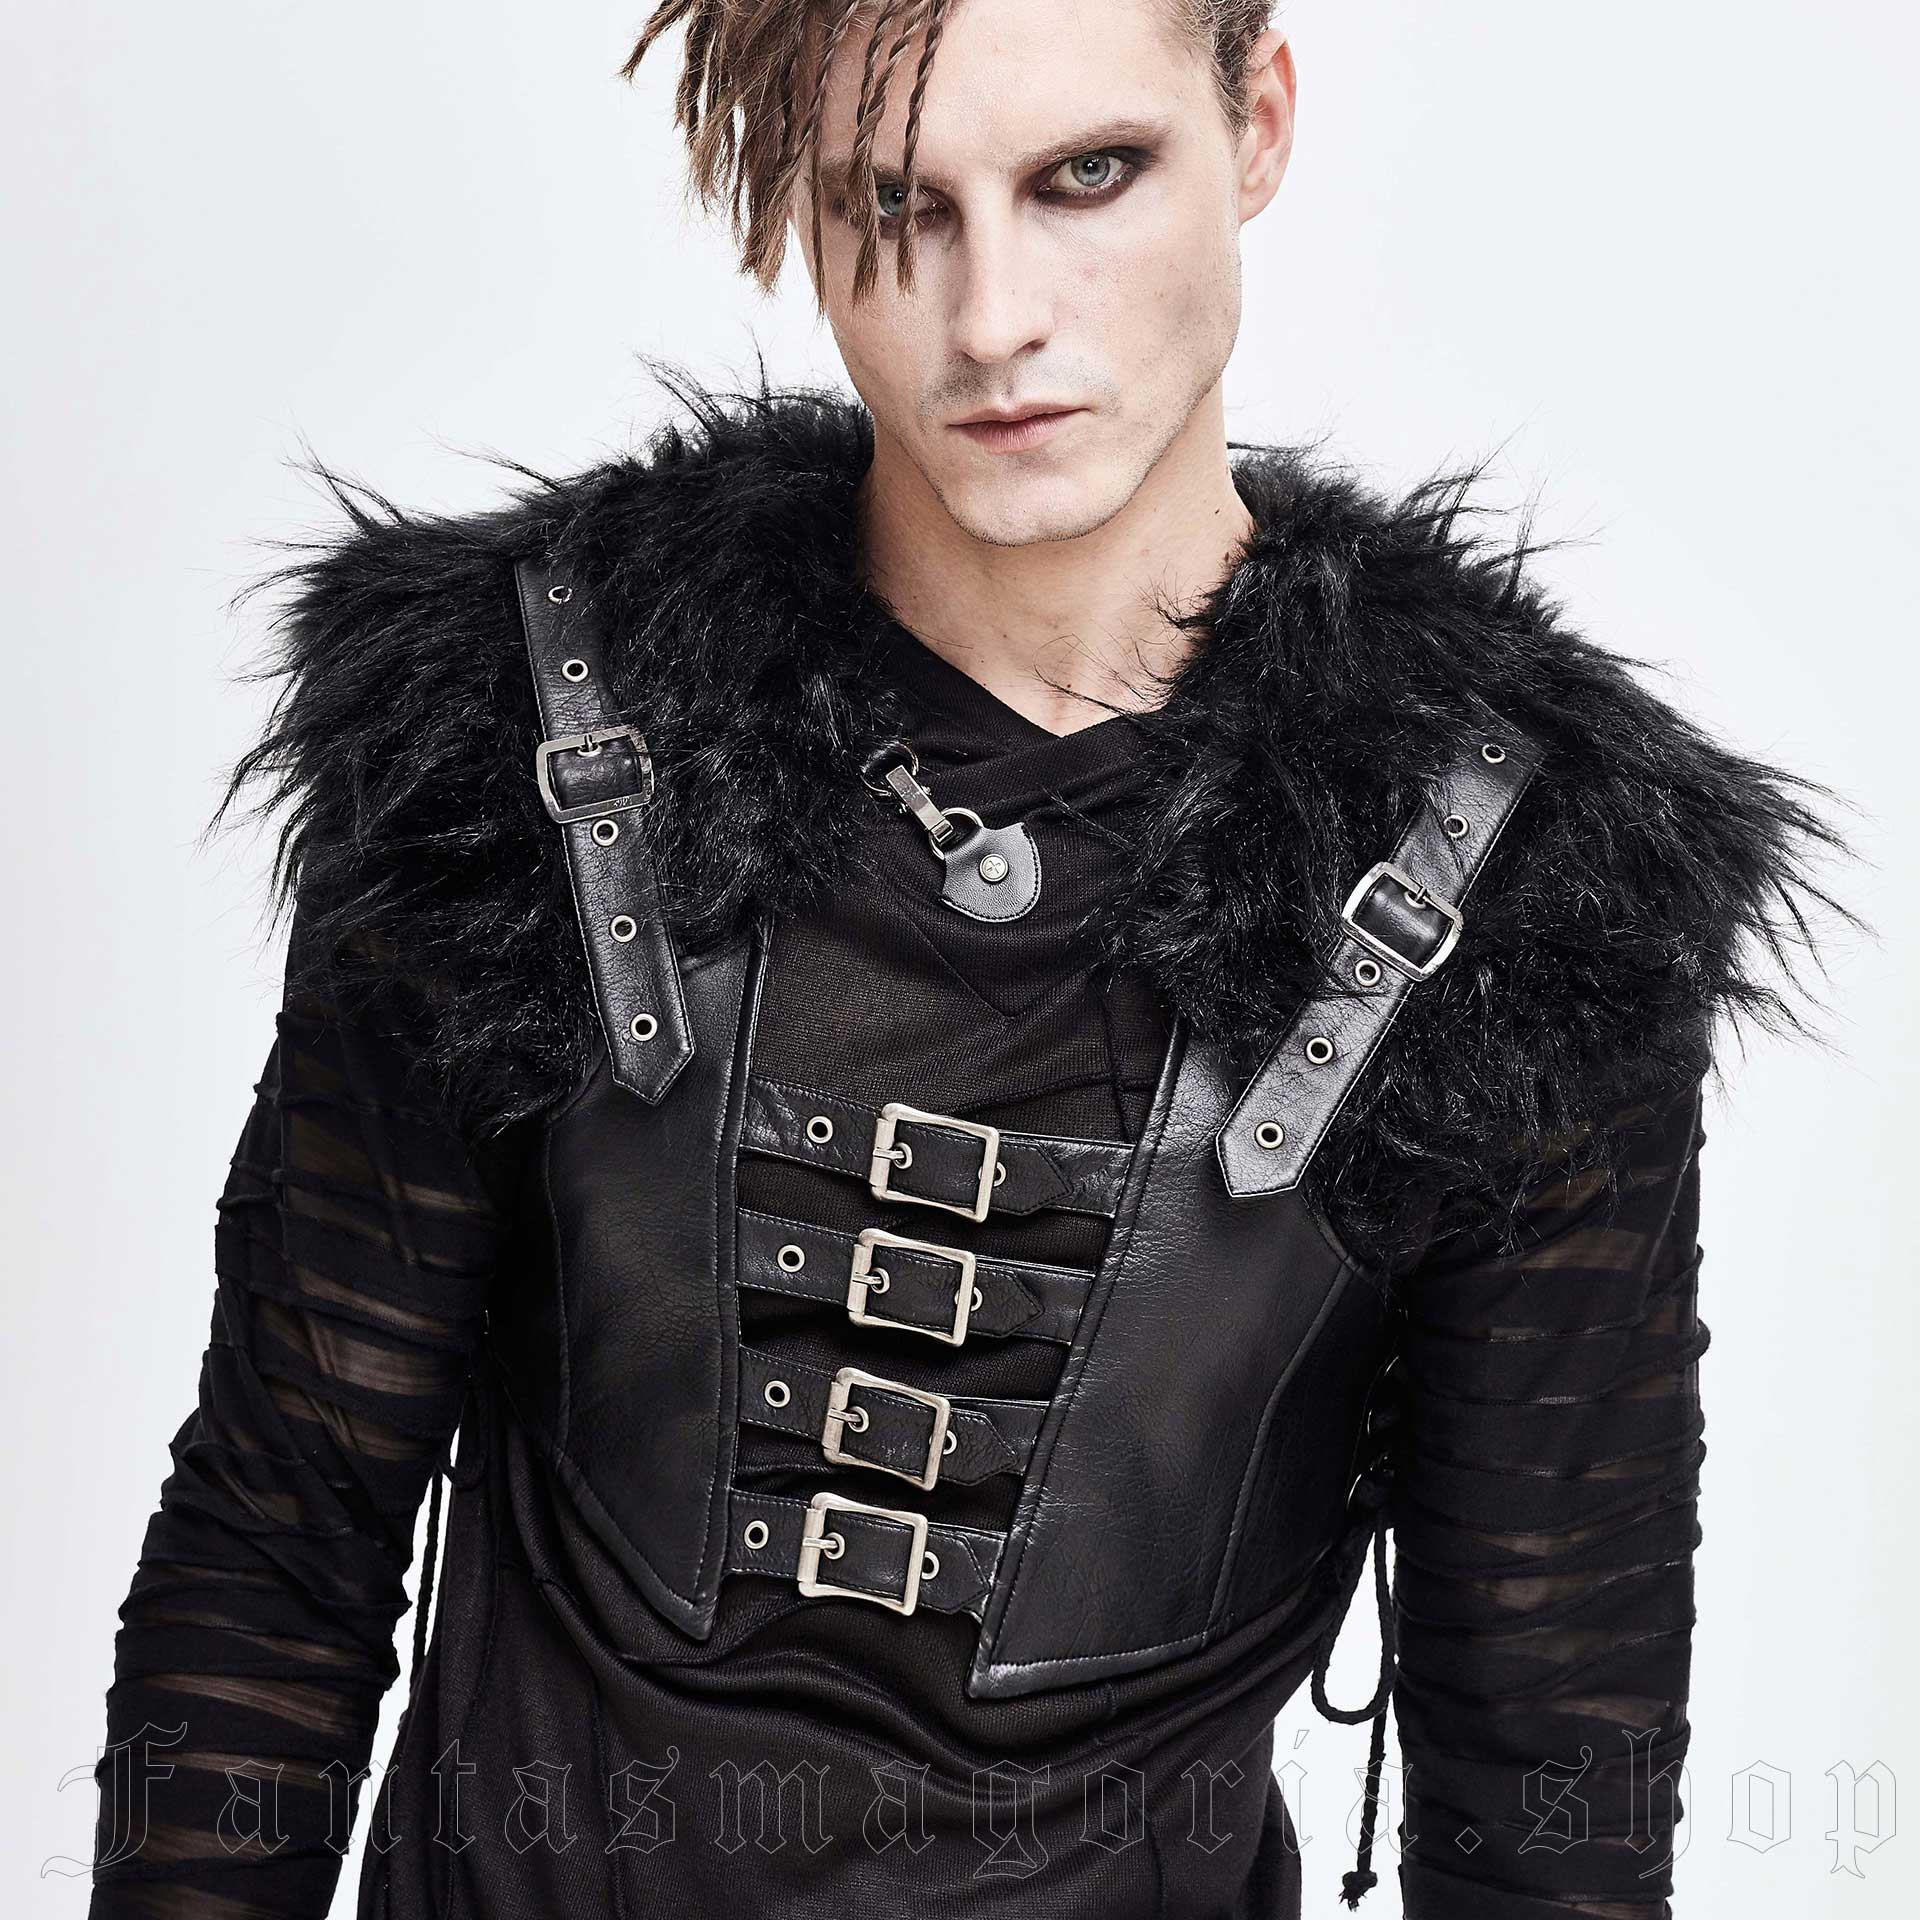 Goth Male Outfits | tunersread.com